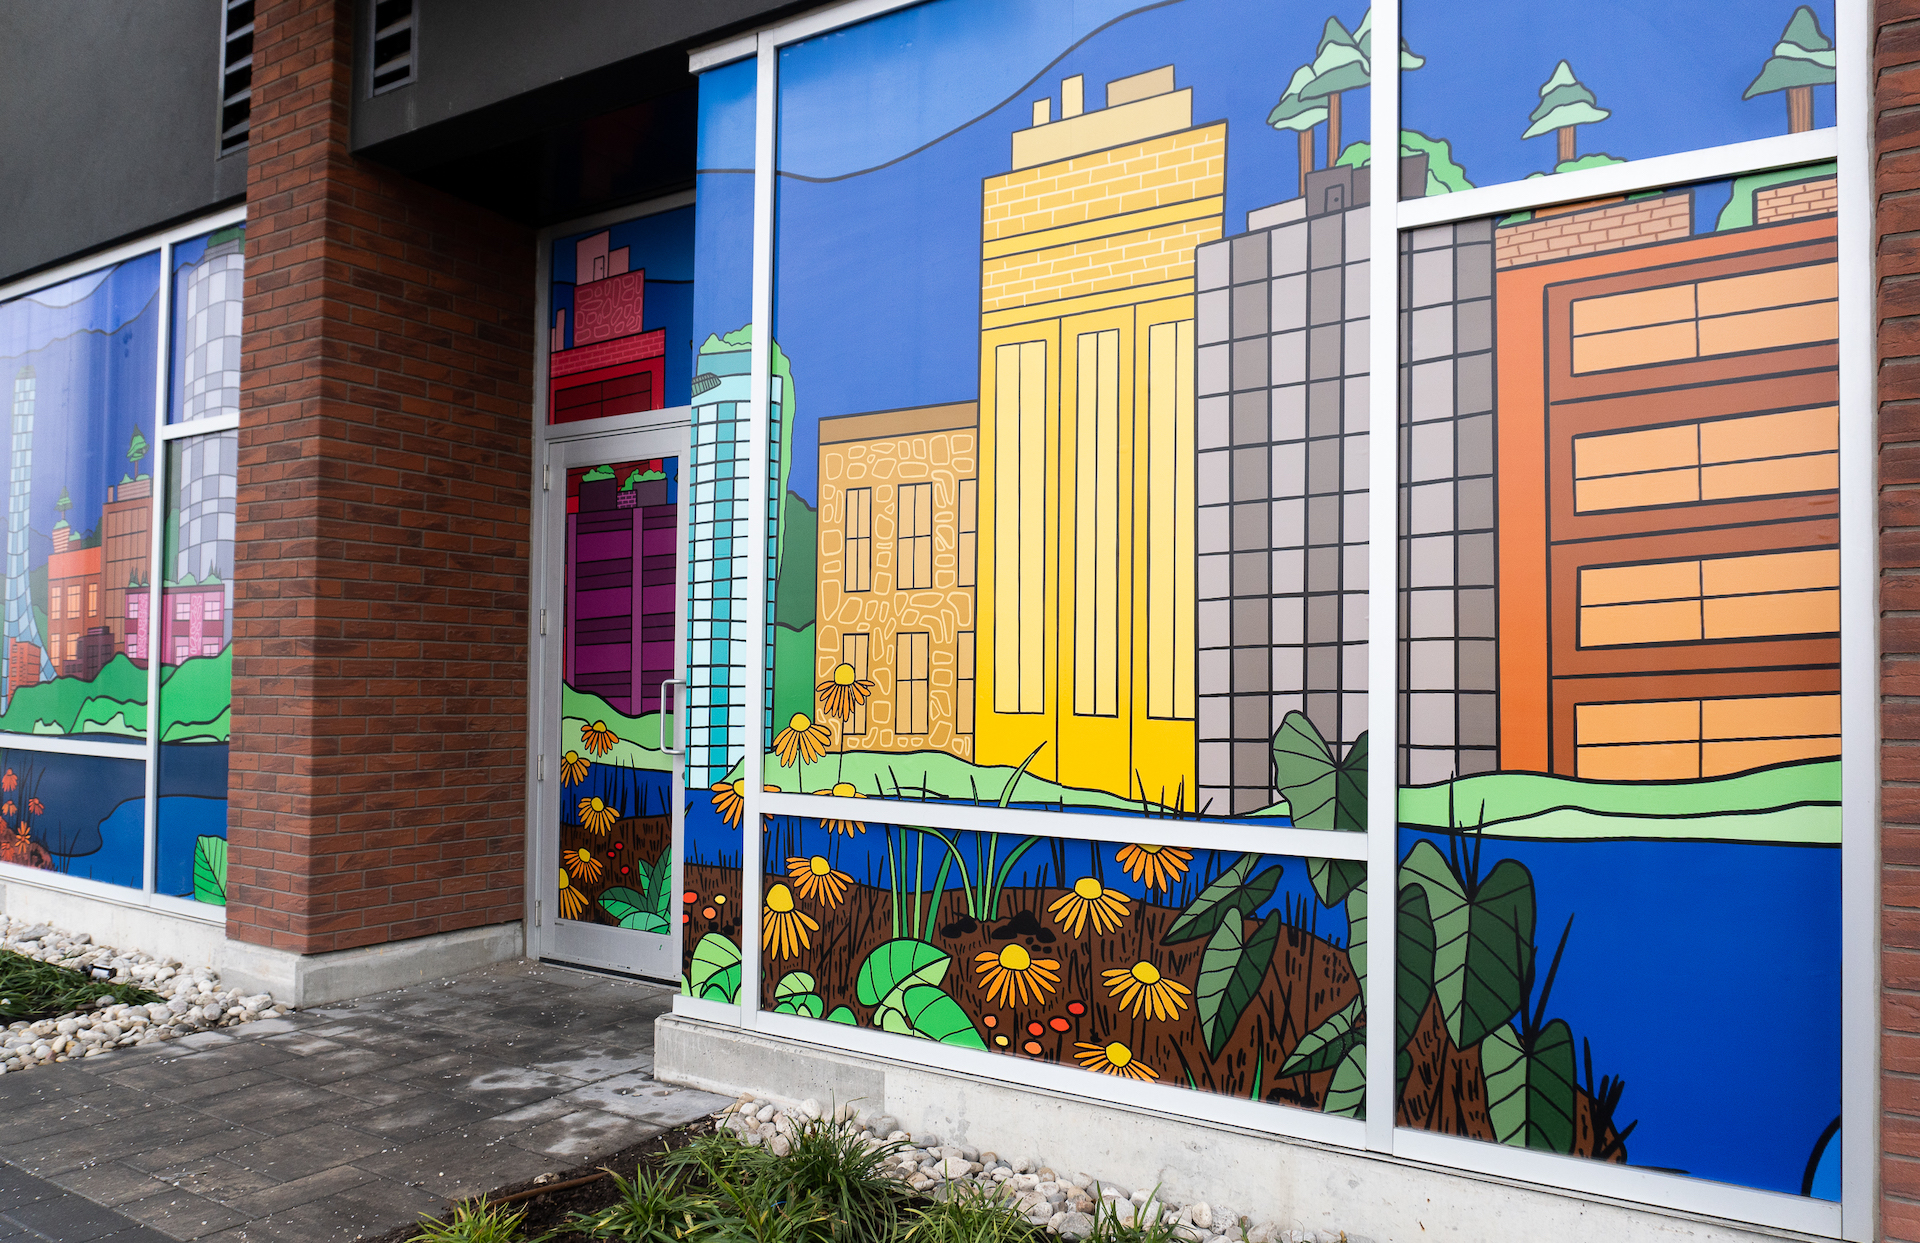 A storefront window with large murals covering the windows. It has colourful and bold imagery of city buildings, nature, grassy hills, and blue skies representing community, growth and convergence